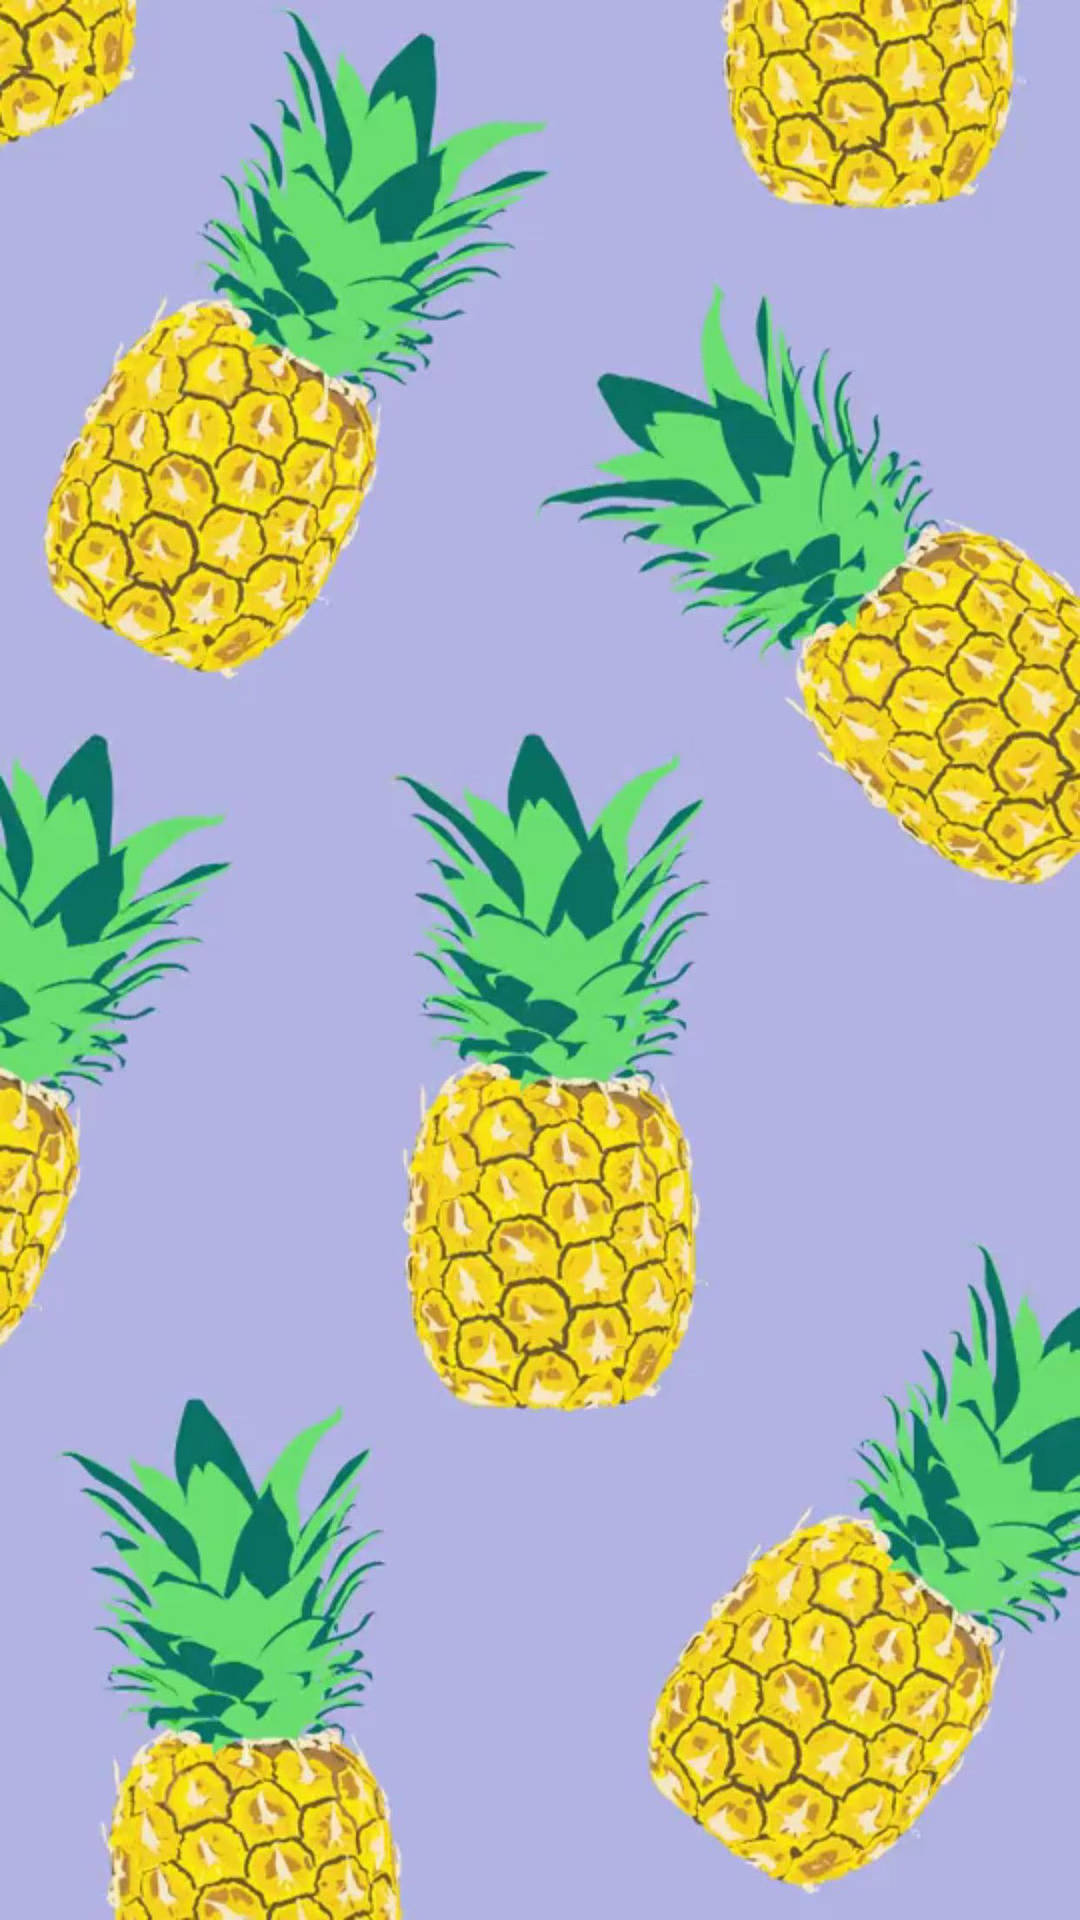 Stay Different with the Pineapple iPhone Wallpaper